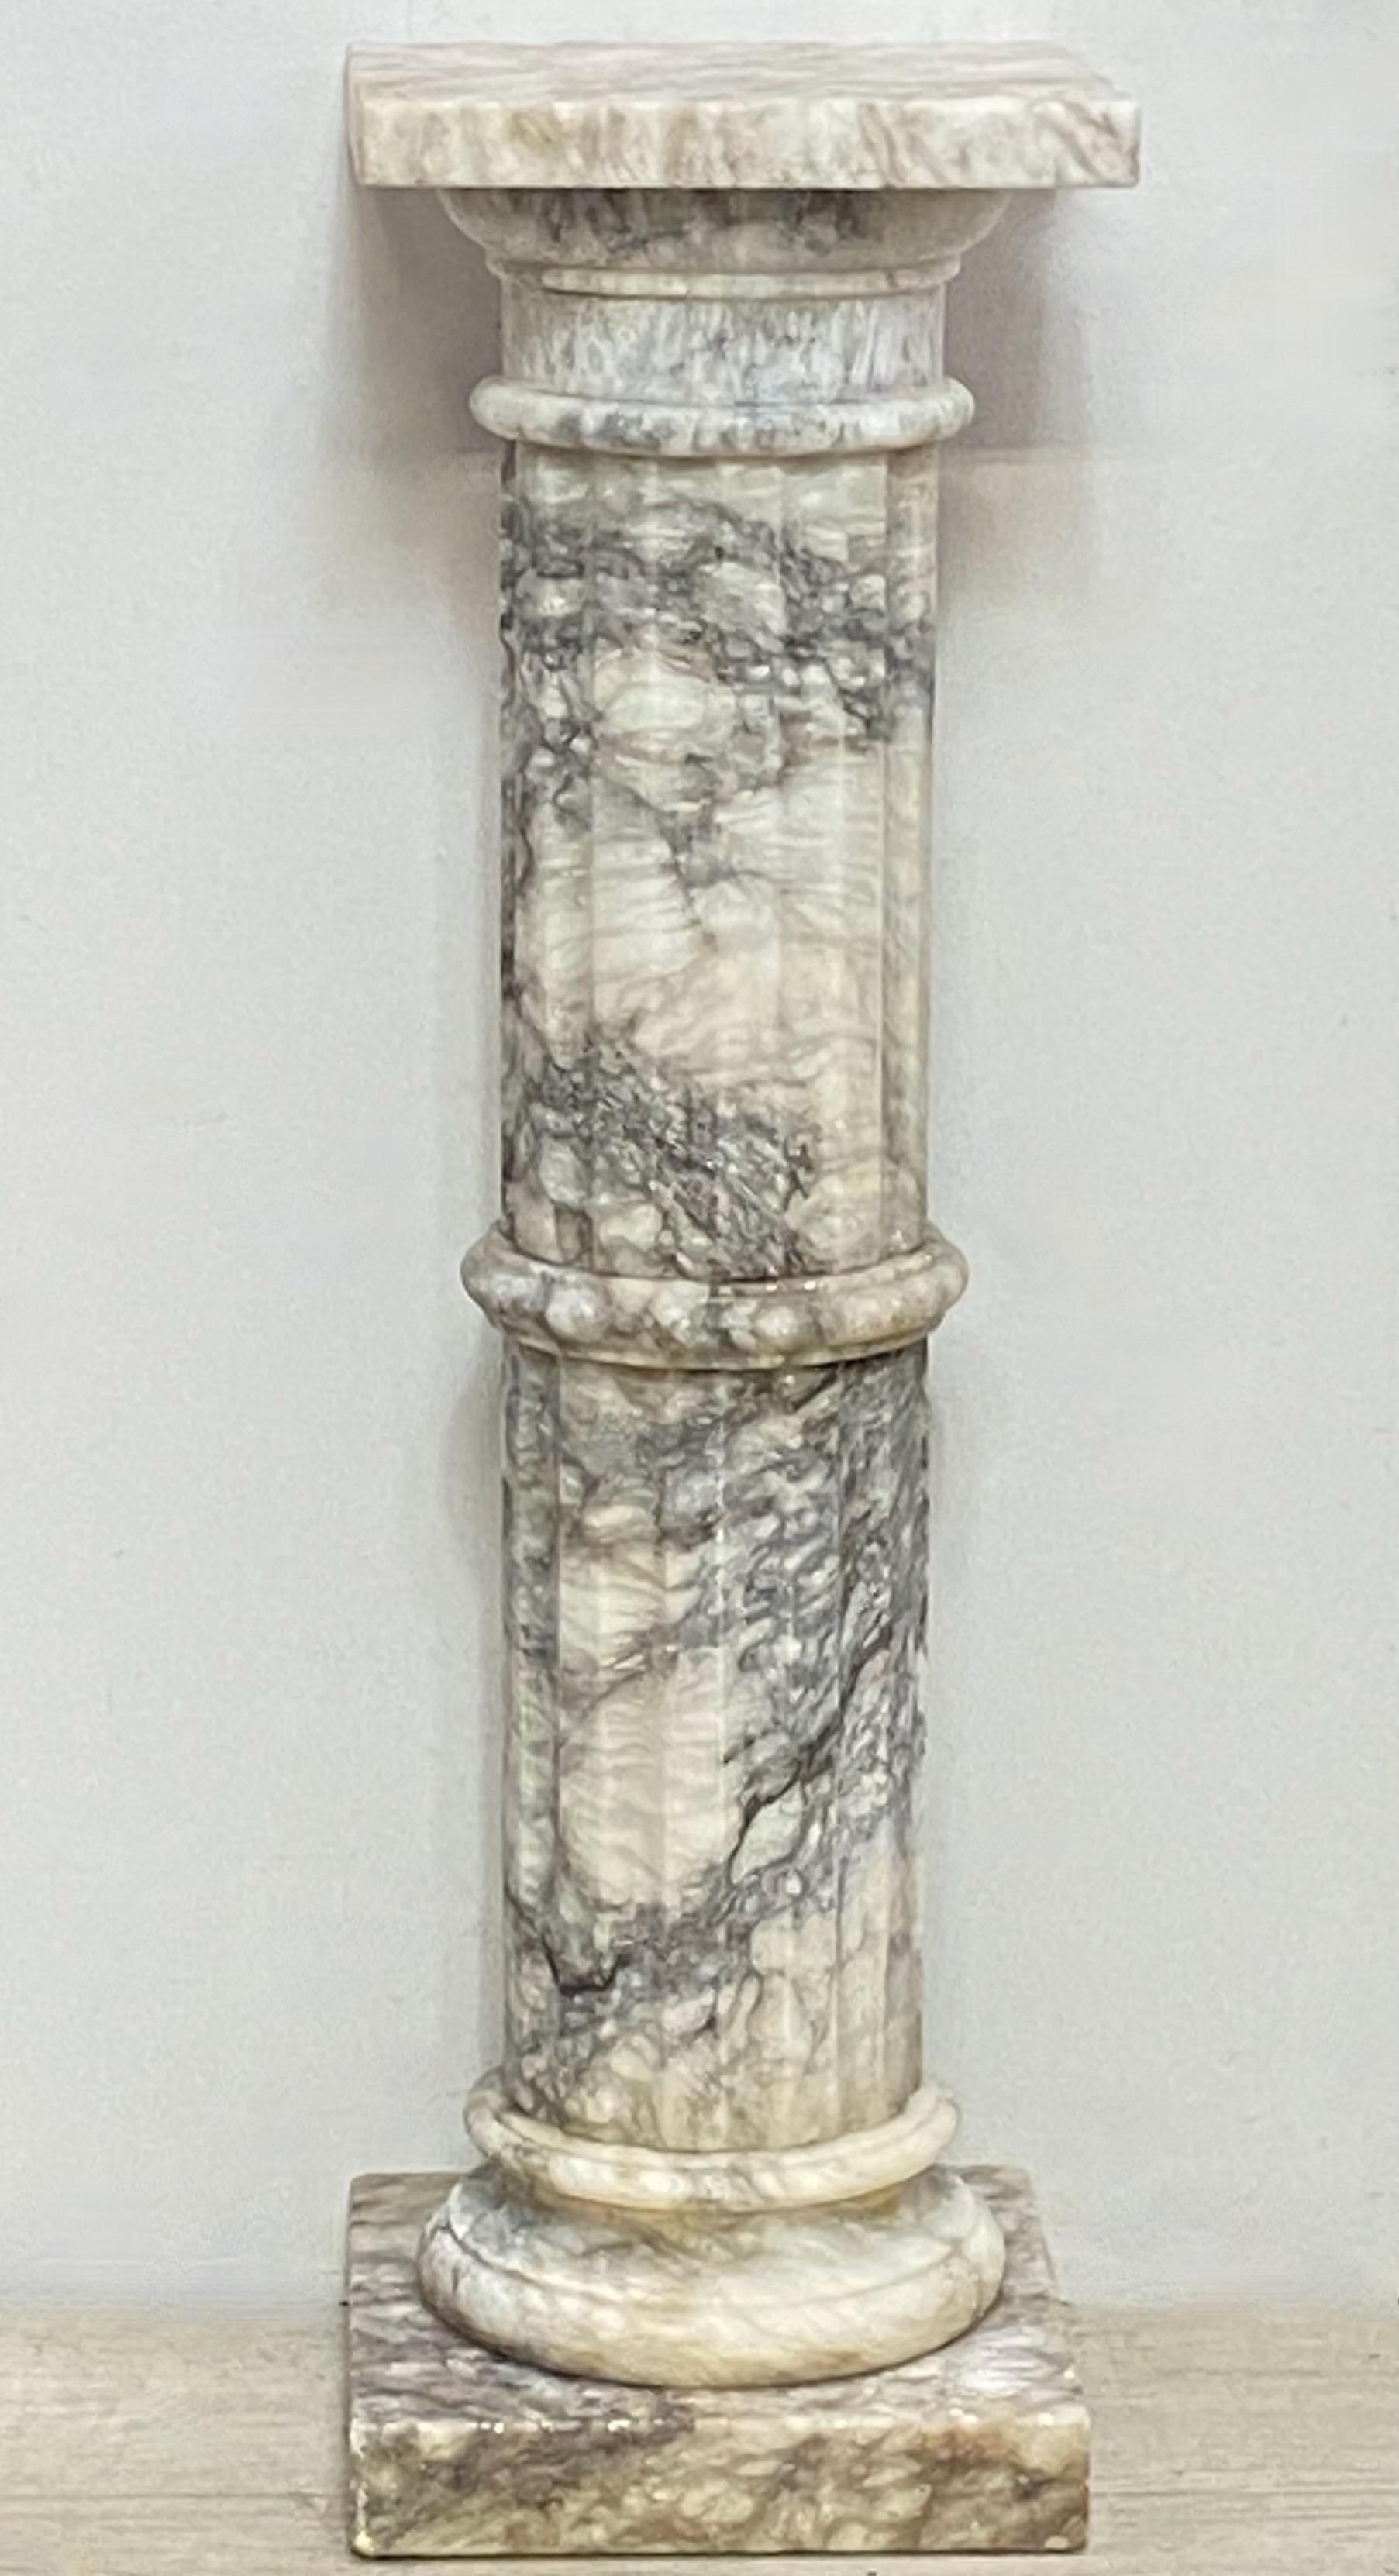 Classic carved and fluted marble column or pedestal.
Italy, early 20th century.